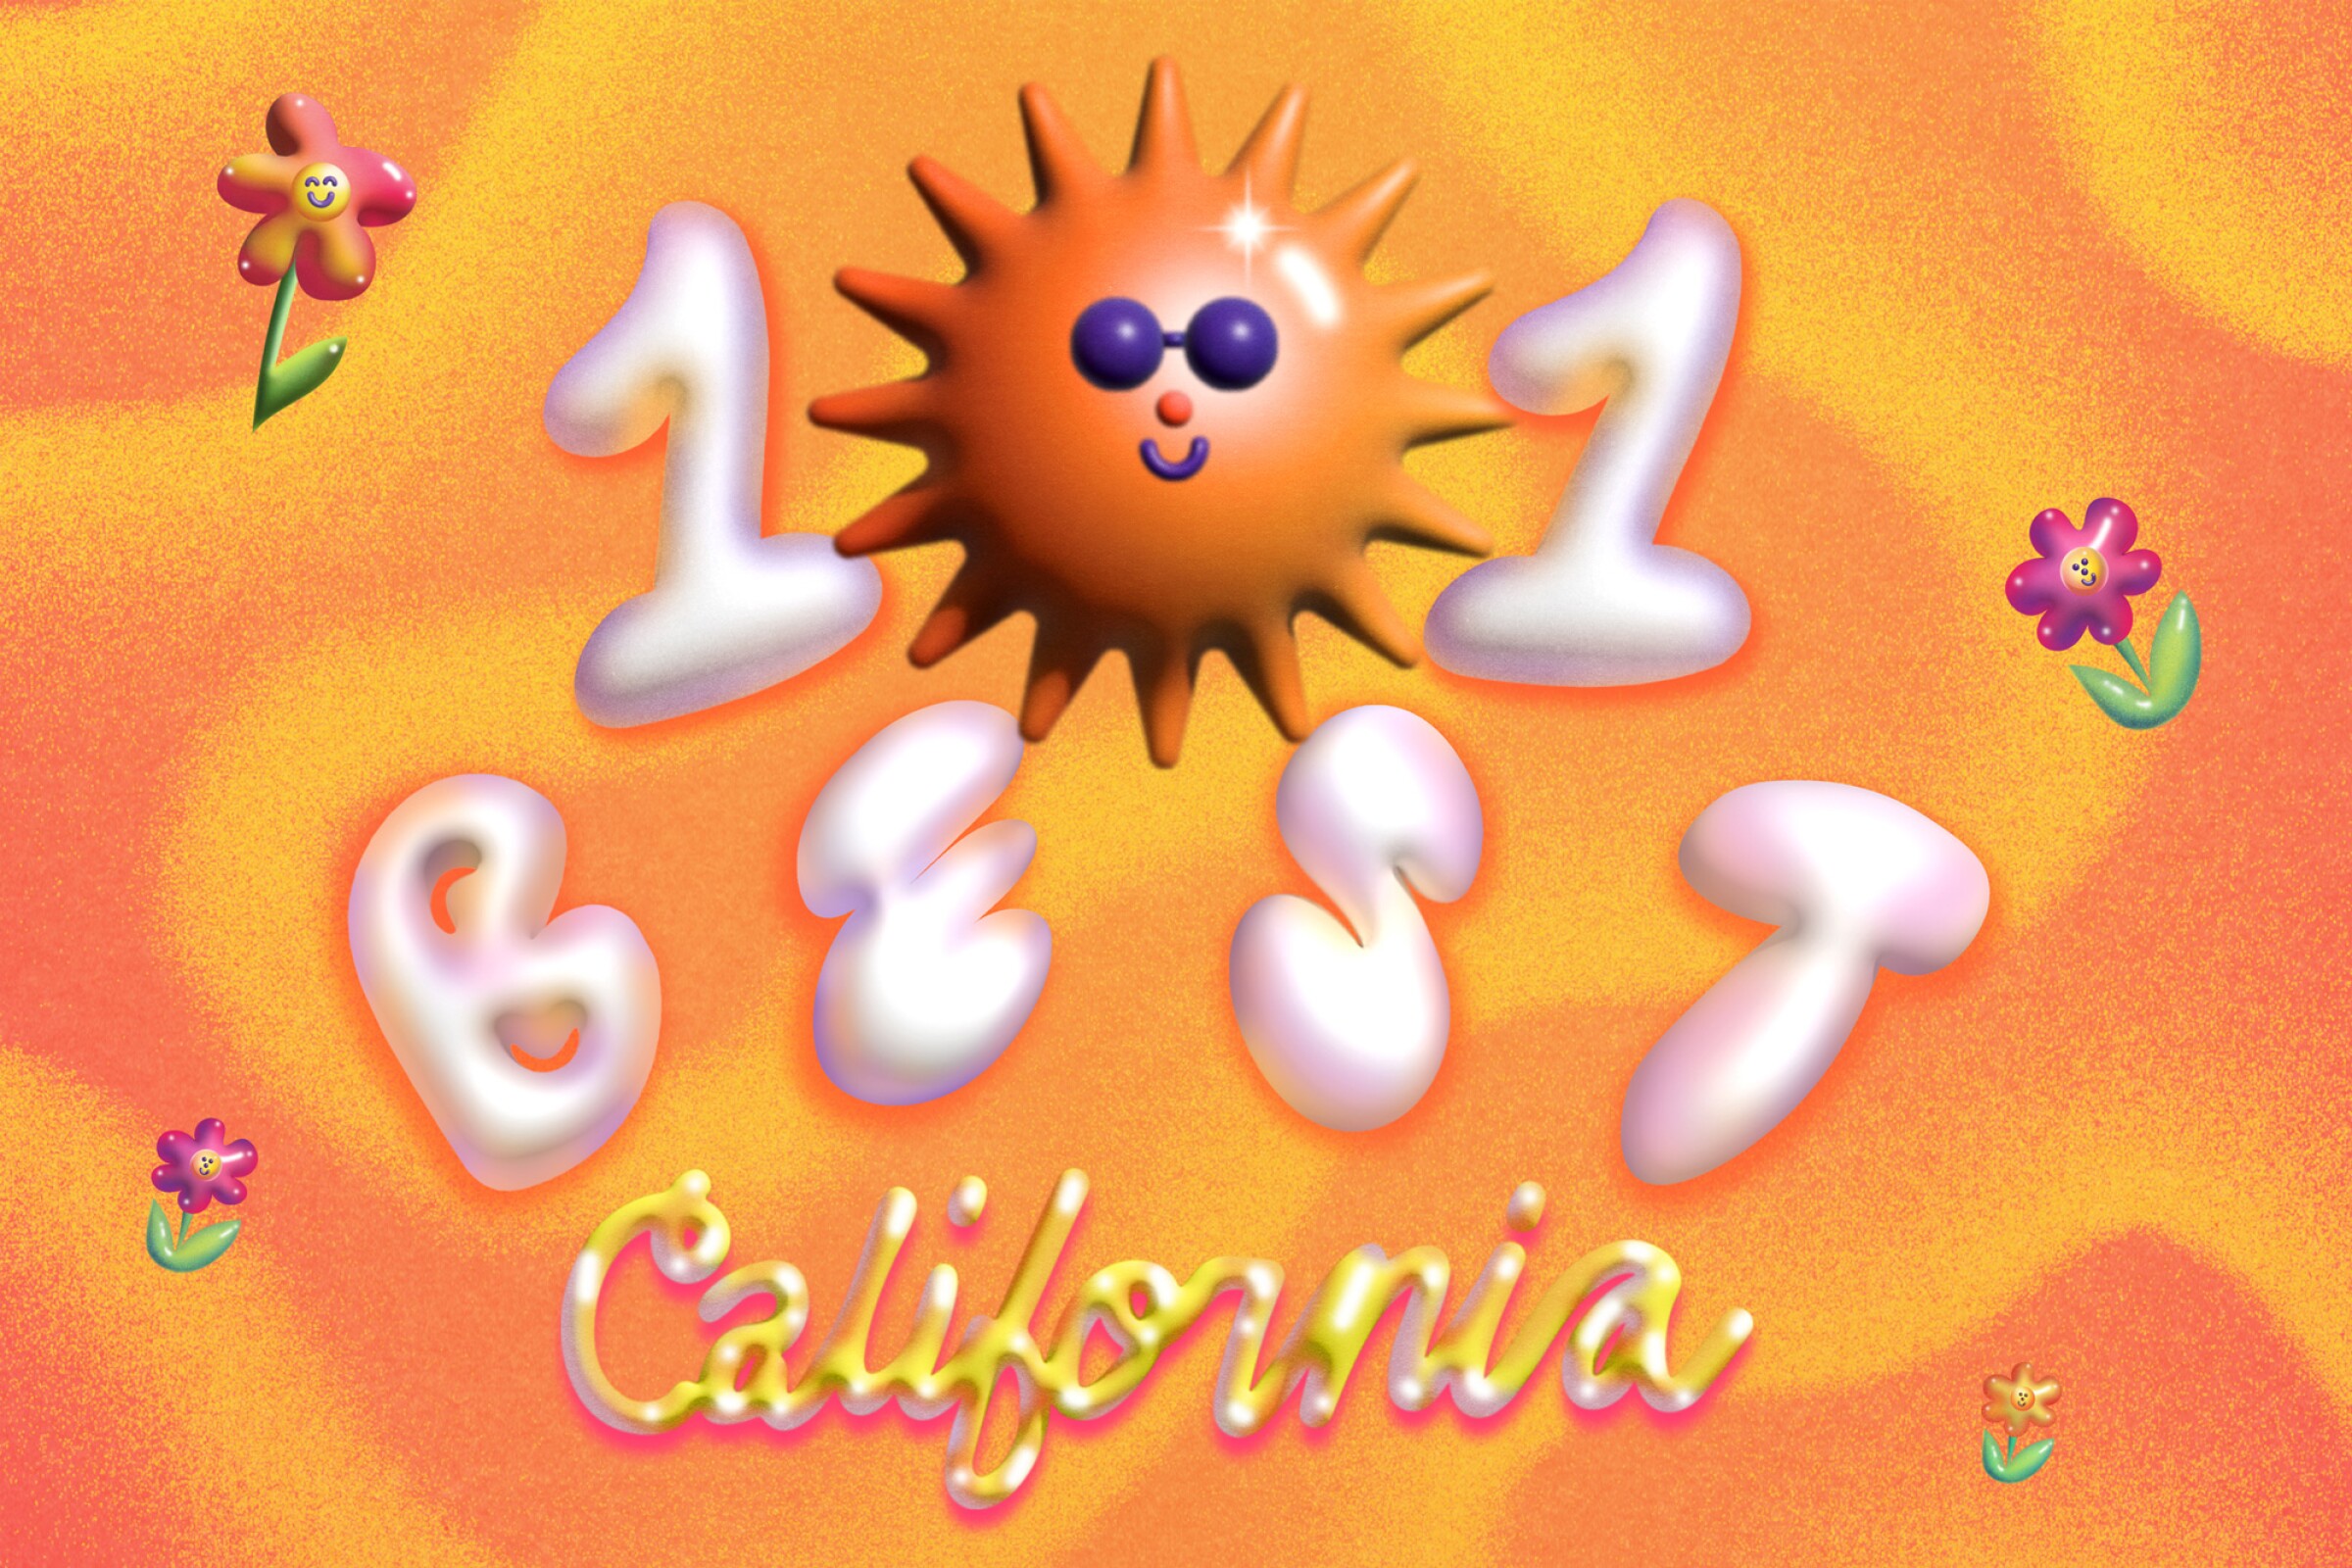 illustrated text reading "101 best California" with a sun wearing sunglasses in place of the zero on a colorful background